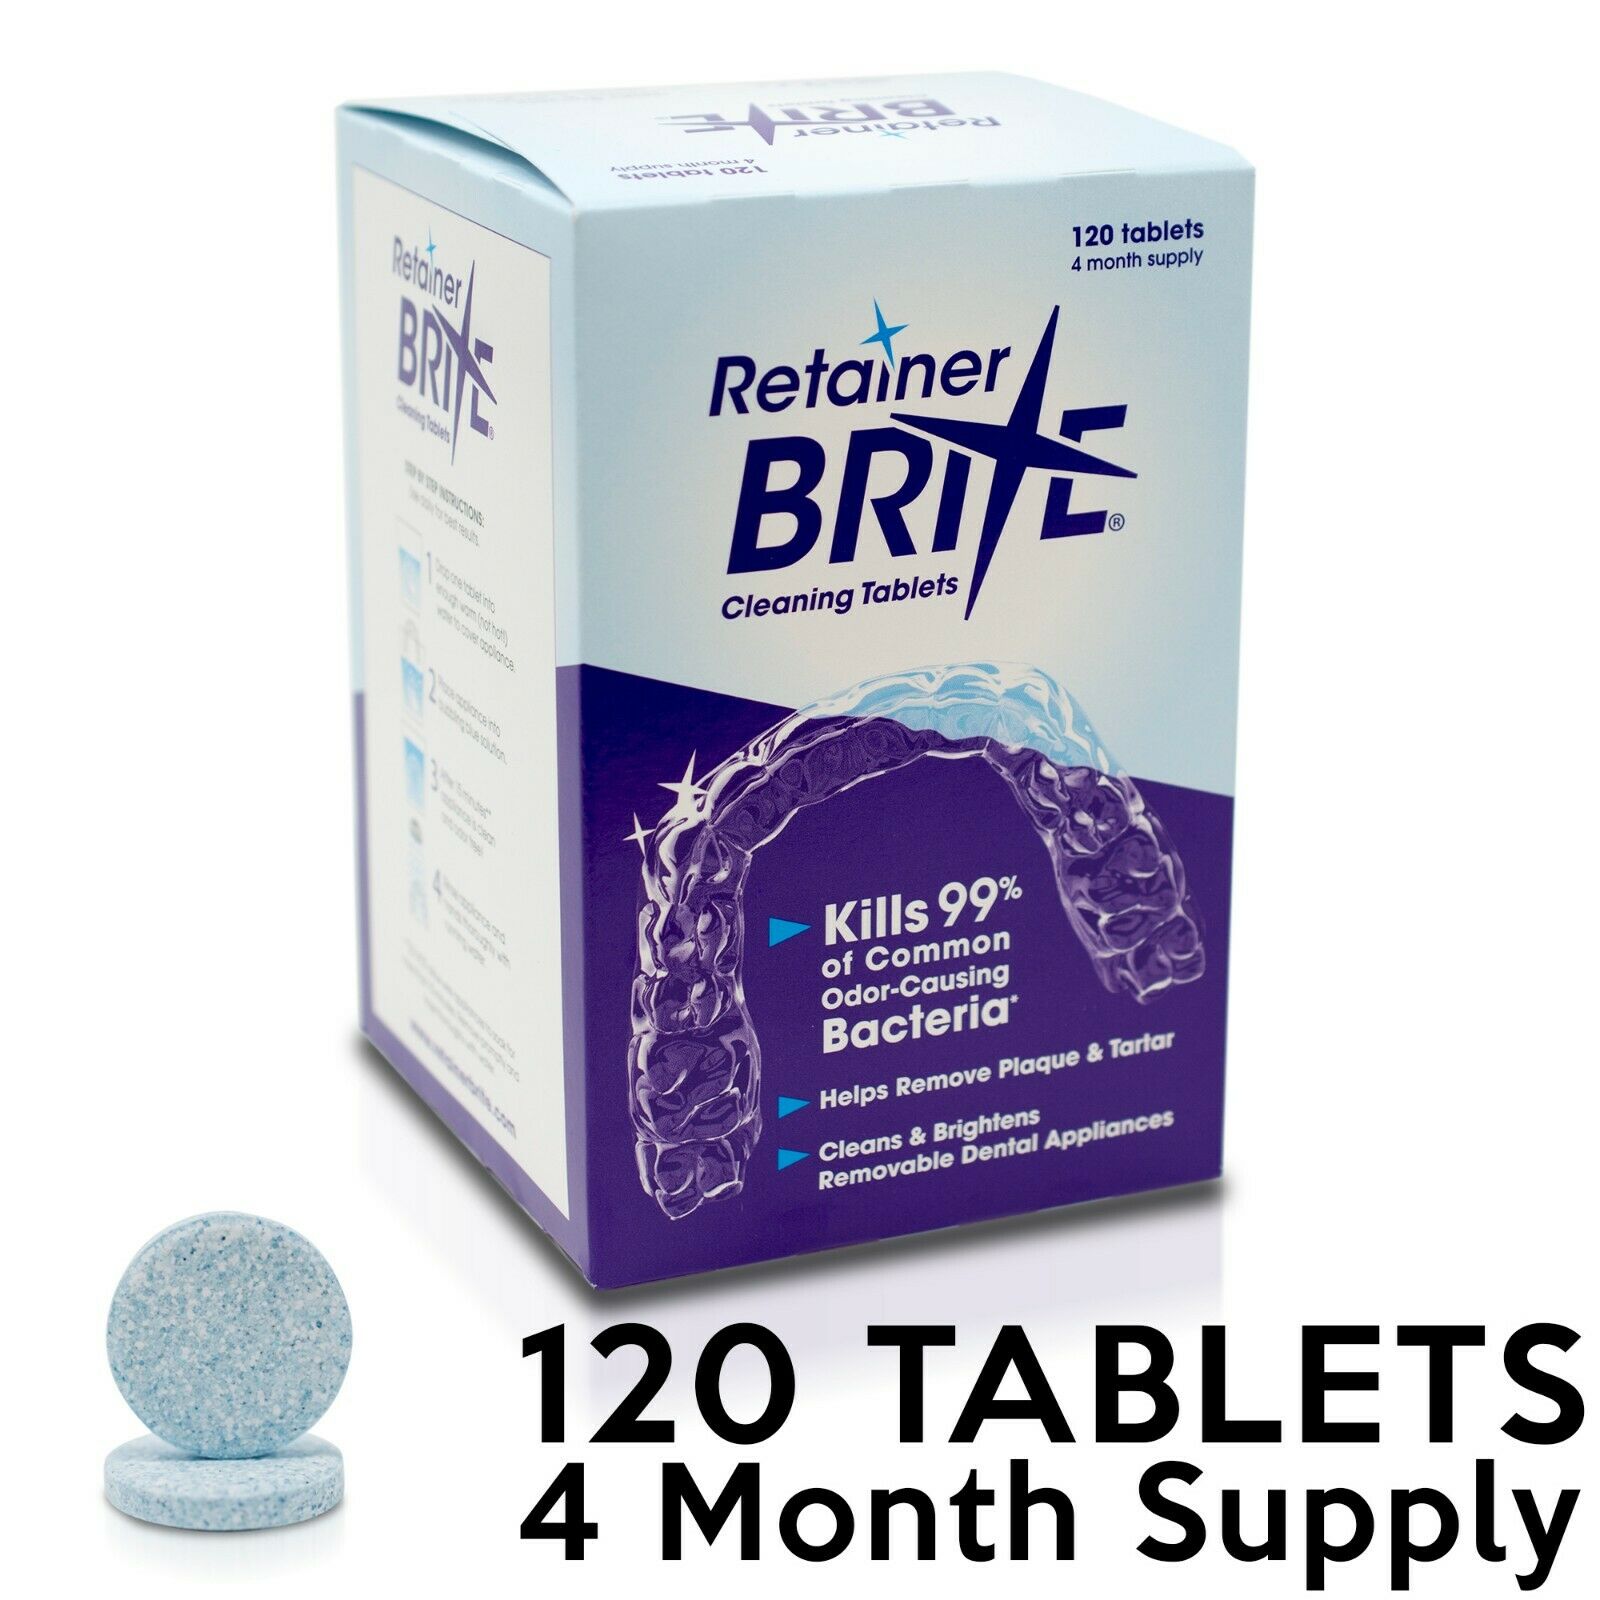 Retainer Brite Cleaning Tablets By Dentsply Sirona 120 Tablets 4 Months Supply!